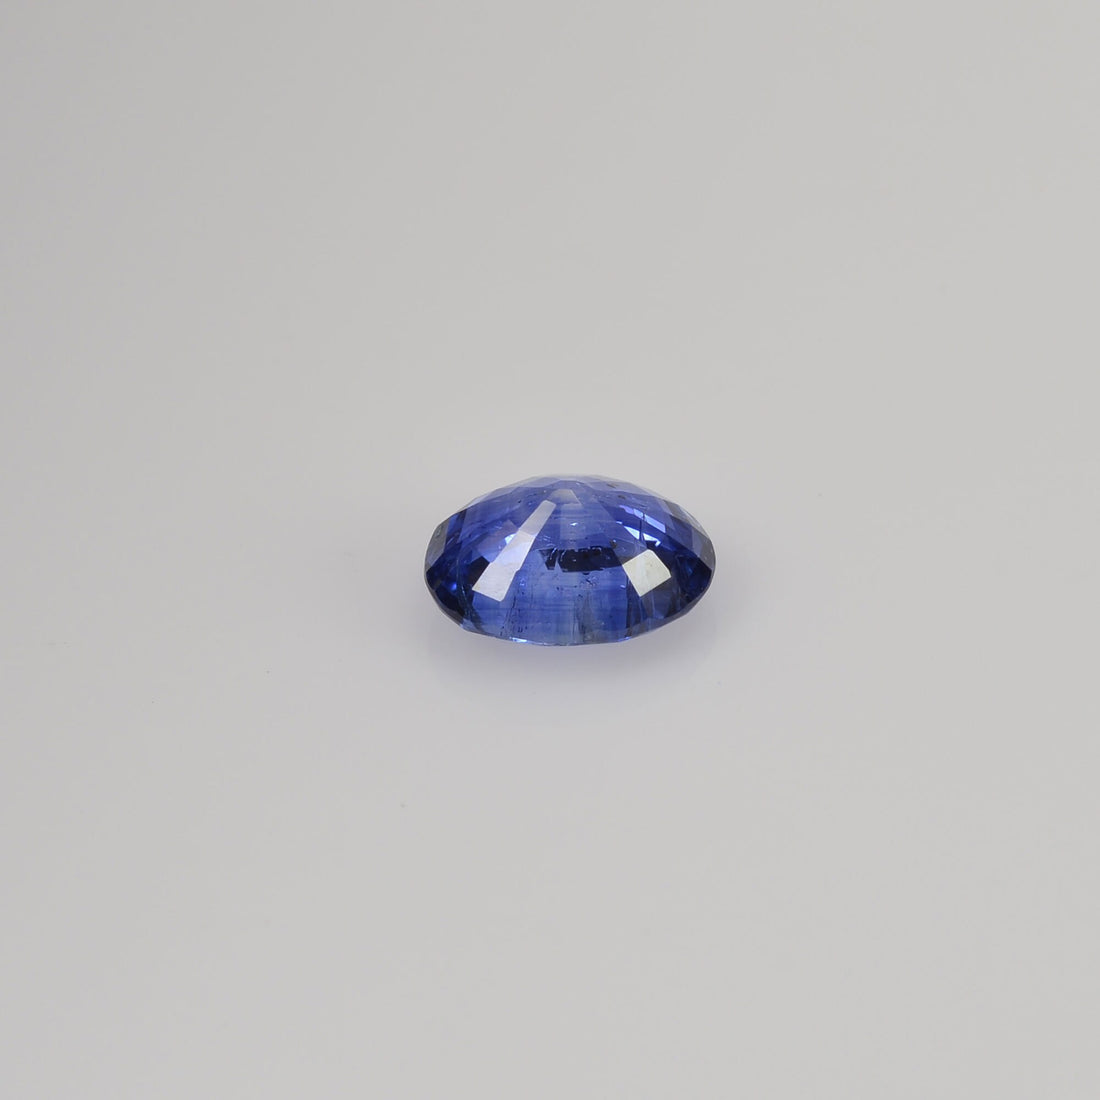 1.25 cts Unheated Natural Blue Sapphire Loose Gemstone Oval Cut Certified